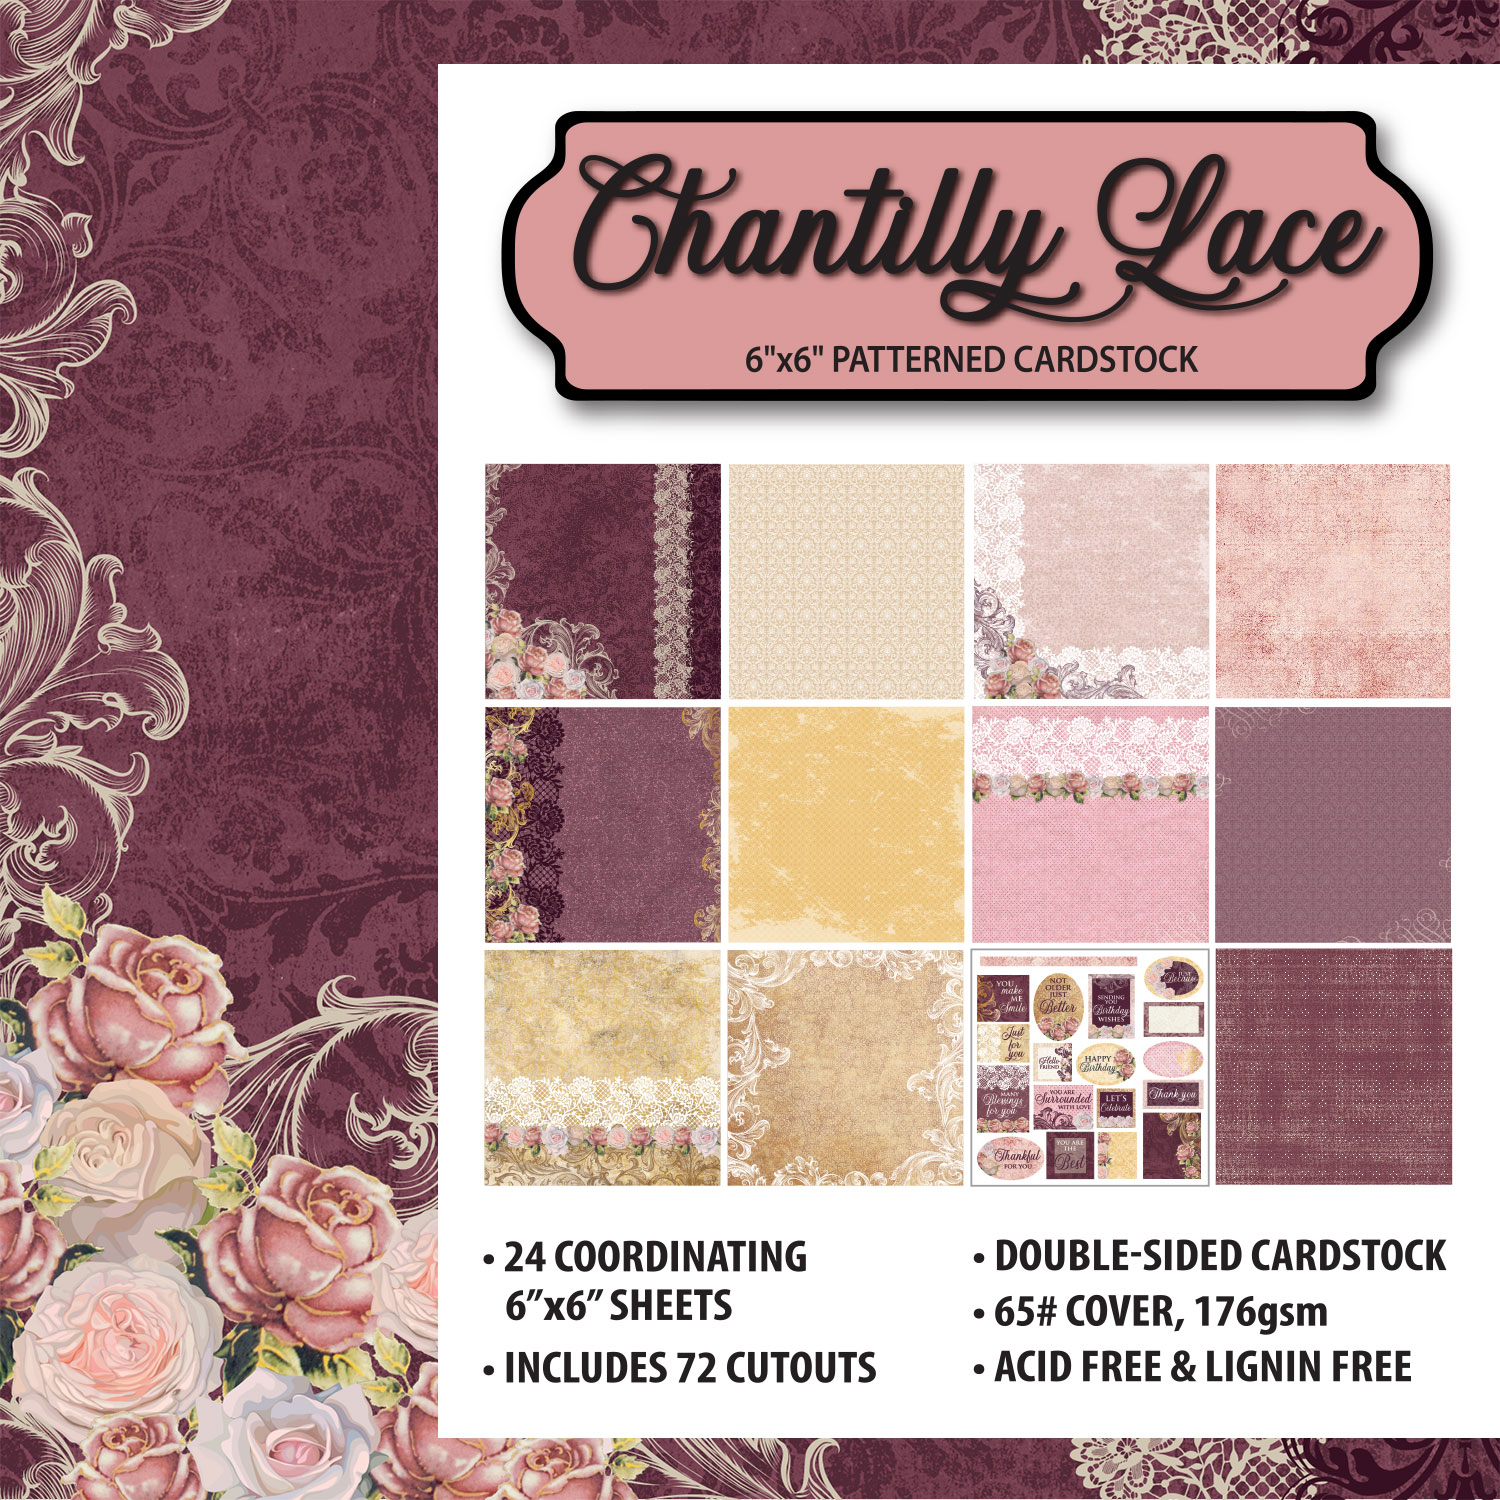 Chantilly Lace 6"x6" Patterned Cardstock